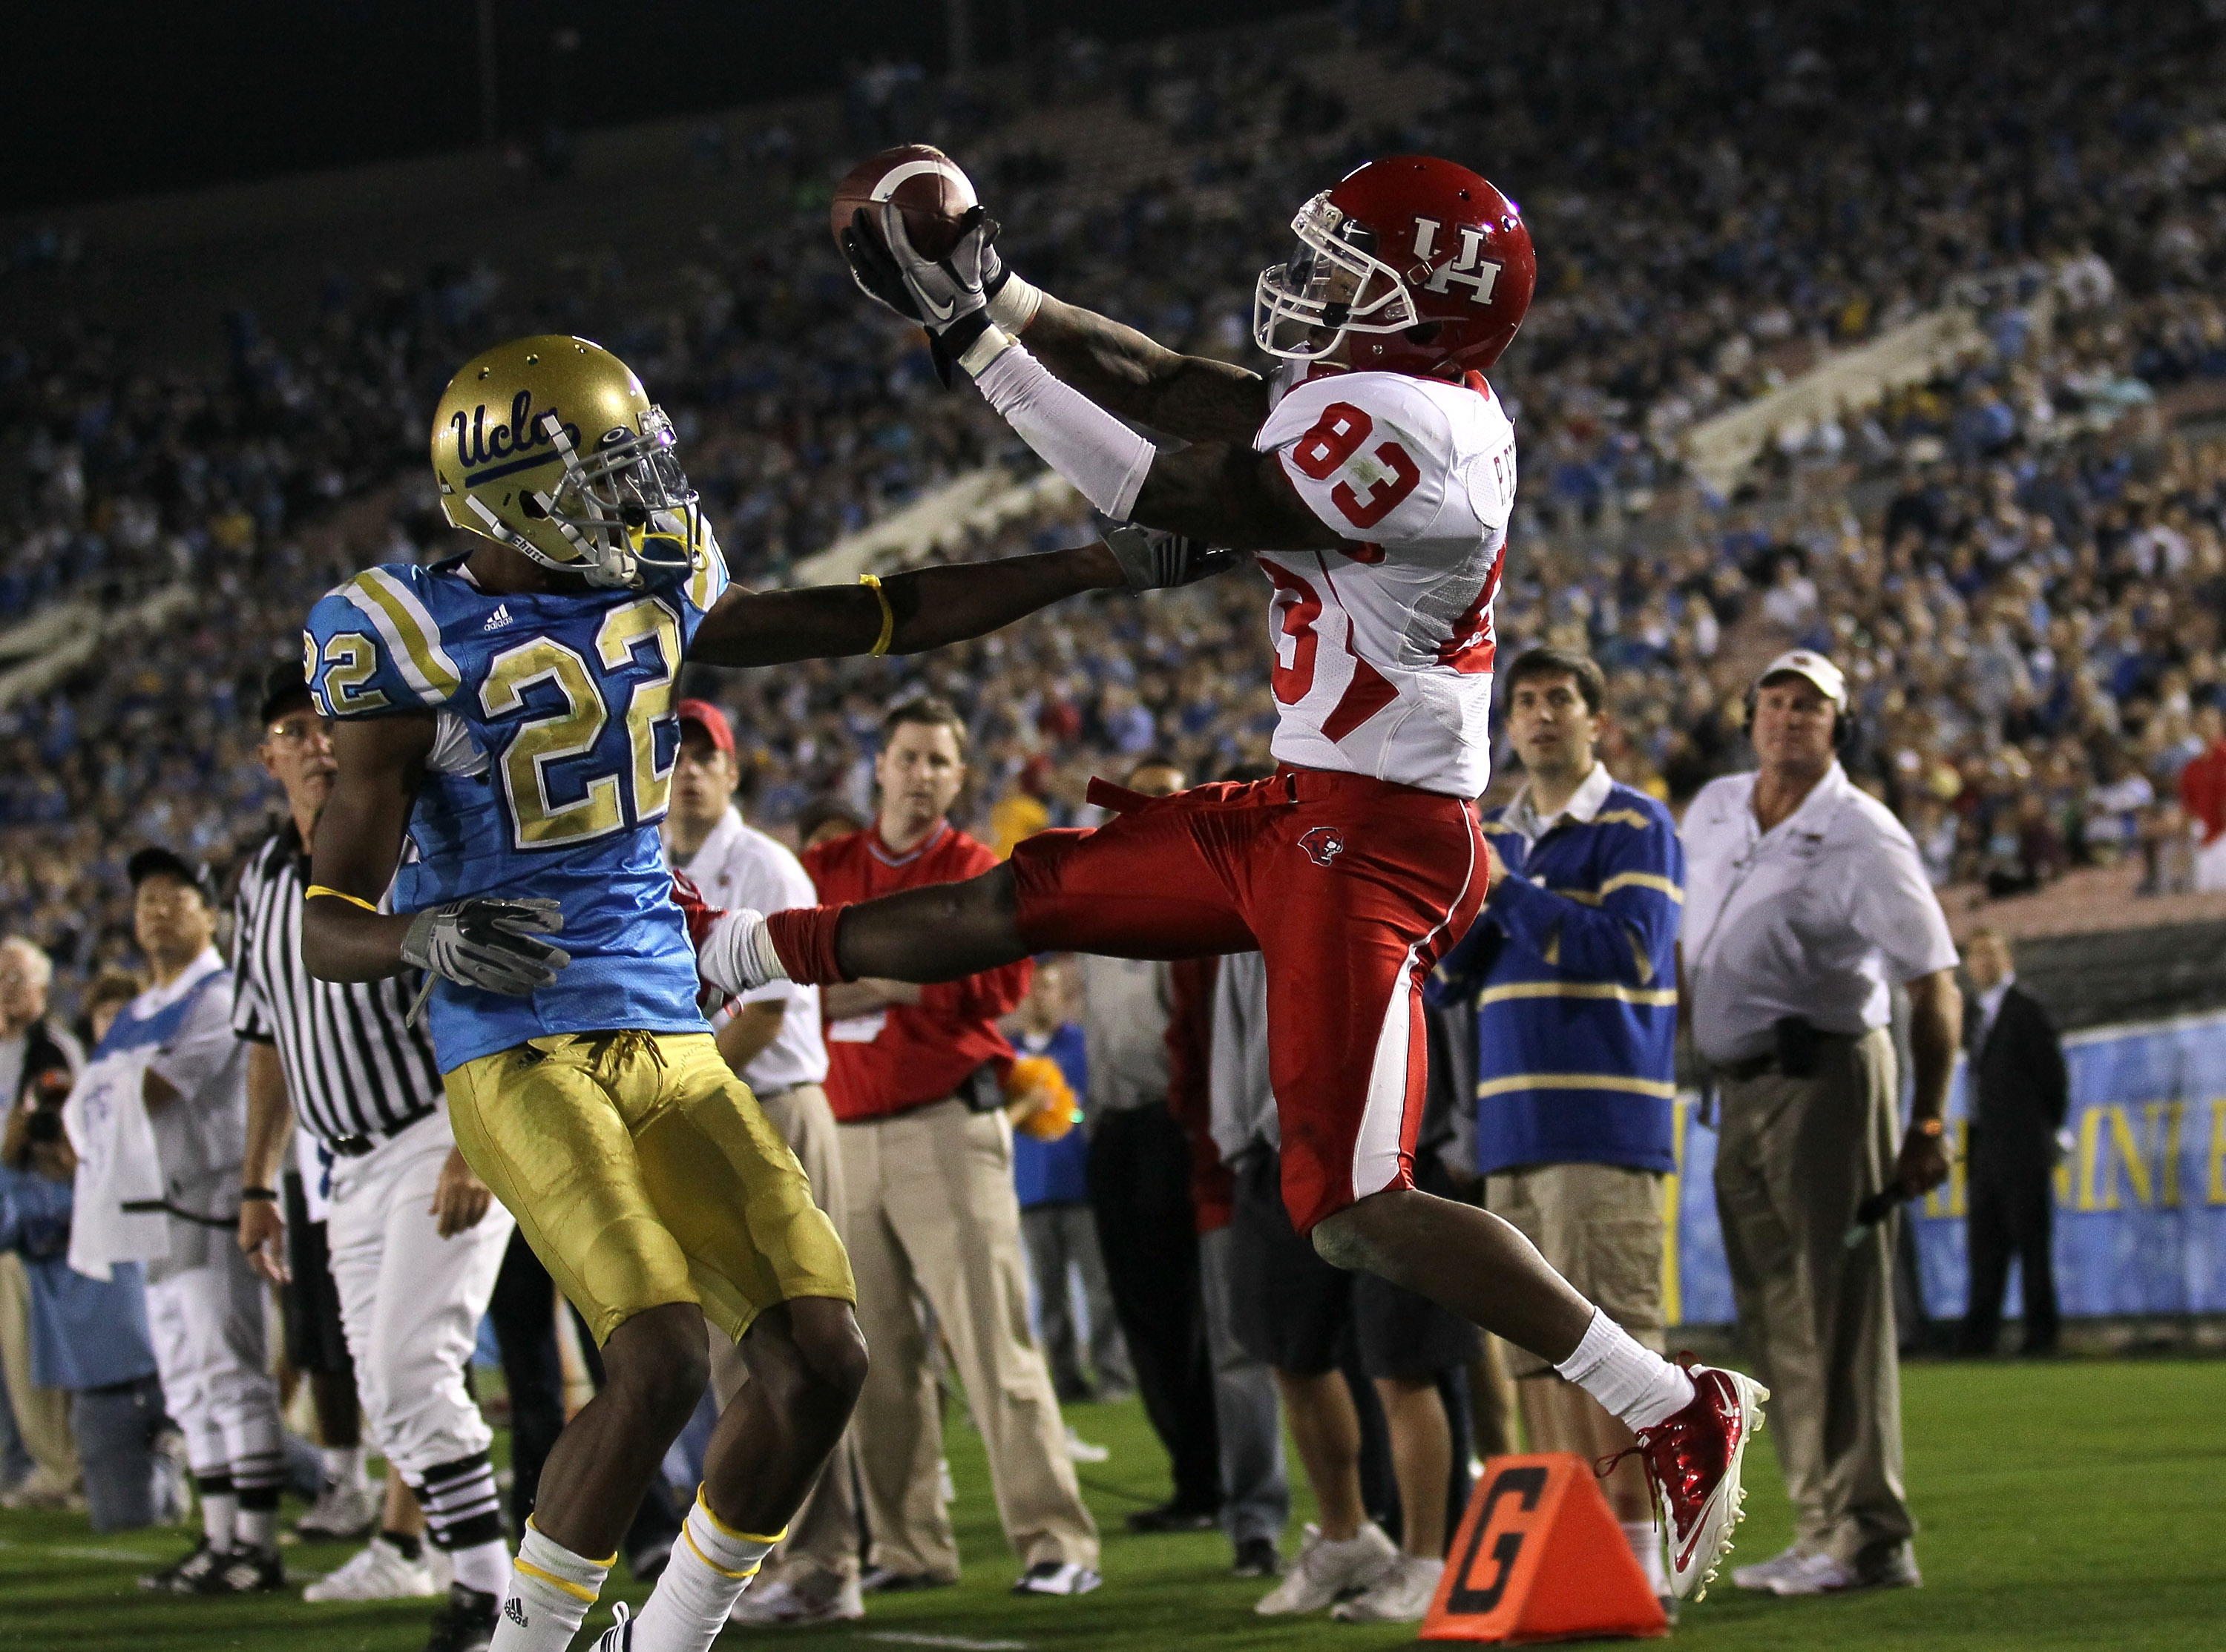 PASADENA, CA - SEPTEMBER 18:  Wide receiver Patrick Edwards #83 of the Houston Cougars goes up for the balll against cornerback Sheldon Price #22 of the UCLA Bruins at the Rose Bowl on September 18, 2010 in Pasadena, California.  UCLA won 31-13.  (Photo b